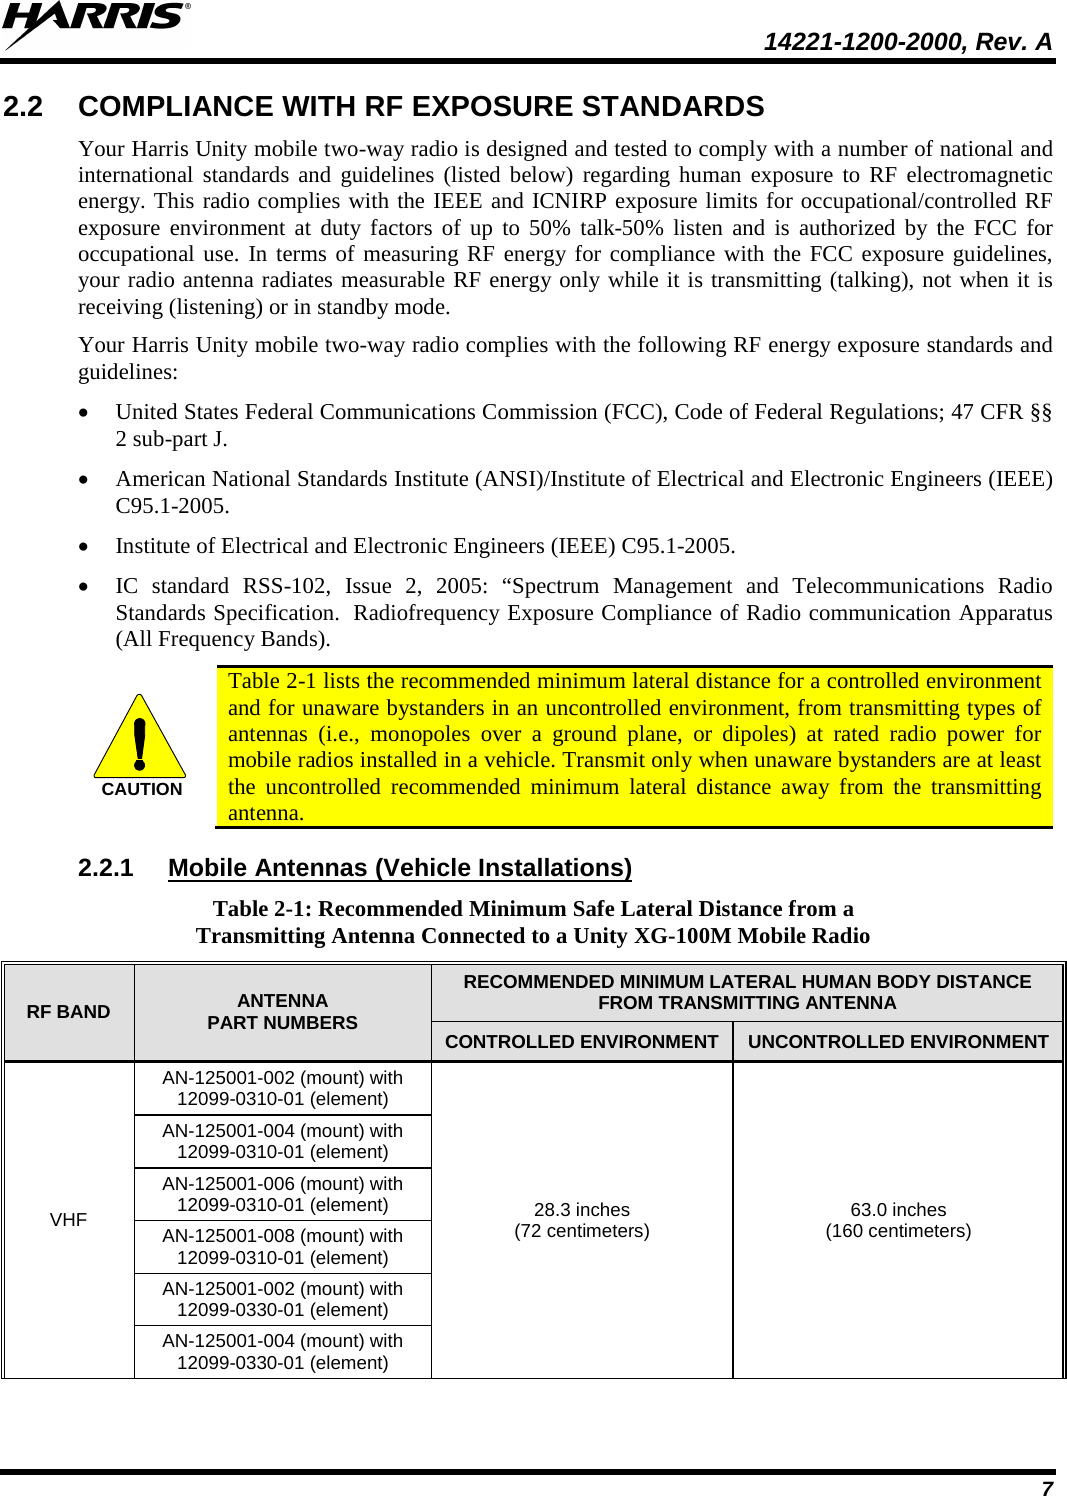  14221-1200-2000, Rev. A 7 2.2 COMPLIANCE WITH RF EXPOSURE STANDARDS Your Harris Unity mobile two-way radio is designed and tested to comply with a number of national and international standards and guidelines (listed below) regarding human exposure to RF electromagnetic energy. This radio complies with the IEEE and ICNIRP exposure limits for occupational/controlled RF exposure environment at duty factors of up to 50% talk-50% listen and is authorized by the FCC for occupational use. In terms of measuring RF energy for compliance with the FCC exposure guidelines, your radio antenna radiates measurable RF energy only while it is transmitting (talking), not when it is receiving (listening) or in standby mode. Your Harris Unity mobile two-way radio complies with the following RF energy exposure standards and guidelines: • United States Federal Communications Commission (FCC), Code of Federal Regulations; 47 CFR §§ 2 sub-part J. • American National Standards Institute (ANSI)/Institute of Electrical and Electronic Engineers (IEEE) C95.1-2005. • Institute of Electrical and Electronic Engineers (IEEE) C95.1-2005. • IC standard RSS-102, Issue 2, 2005: “Spectrum Management and Telecommunications Radio Standards Specification.  Radiofrequency Exposure Compliance of Radio communication Apparatus (All Frequency Bands). CAUTION Table 2-1 lists the recommended minimum lateral distance for a controlled environment and for unaware bystanders in an uncontrolled environment, from transmitting types of antennas (i.e., monopoles over a ground plane, or dipoles) at rated radio power for mobile radios installed in a vehicle. Transmit only when unaware bystanders are at least the uncontrolled recommended minimum lateral distance away from the transmitting antenna. 2.2.1 Mobile Antennas (Vehicle Installations) Table 2-1: Recommended Minimum Safe Lateral Distance from a Transmitting Antenna Connected to a Unity XG-100M Mobile Radio RF BAND ANTENNA PART NUMBERS RECOMMENDED MINIMUM LATERAL HUMAN BODY DISTANCE FROM TRANSMITTING ANTENNA CONTROLLED ENVIRONMENT UNCONTROLLED ENVIRONMENT VHF AN-125001-002 (mount) with 12099-0310-01 (element) 28.3 inches (72 centimeters) 63.0 inches (160 centimeters) AN-125001-004 (mount) with 12099-0310-01 (element) AN-125001-006 (mount) with 12099-0310-01 (element) AN-125001-008 (mount) with 12099-0310-01 (element) AN-125001-002 (mount) with 12099-0330-01 (element) AN-125001-004 (mount) with 12099-0330-01 (element) 